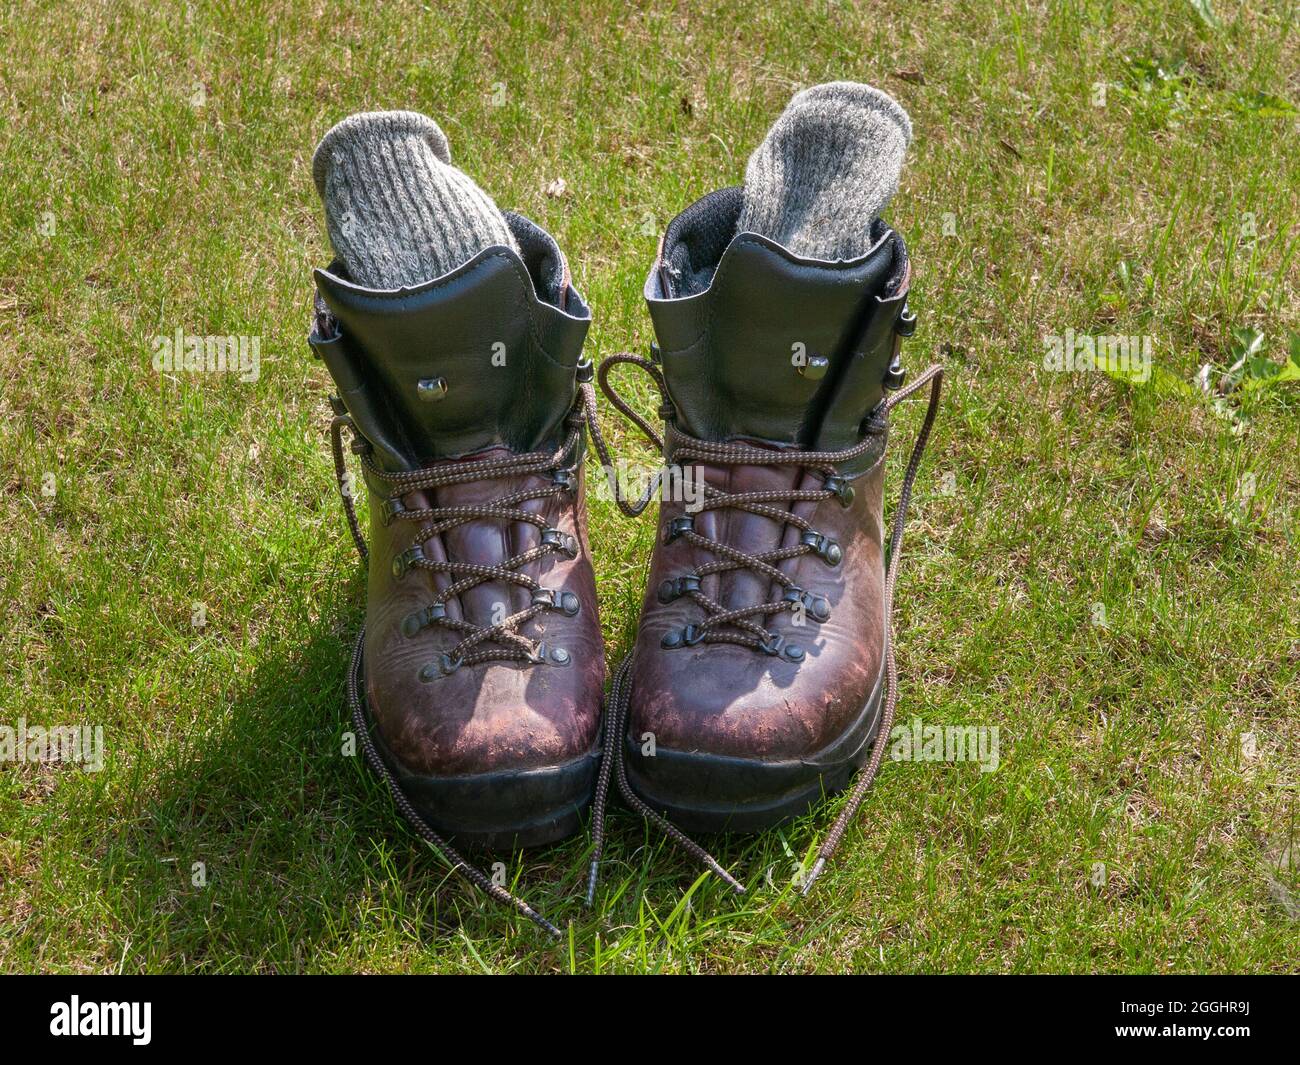 Pair of worn and well used leather walking boots with thick wool hiking socks Stock Photo